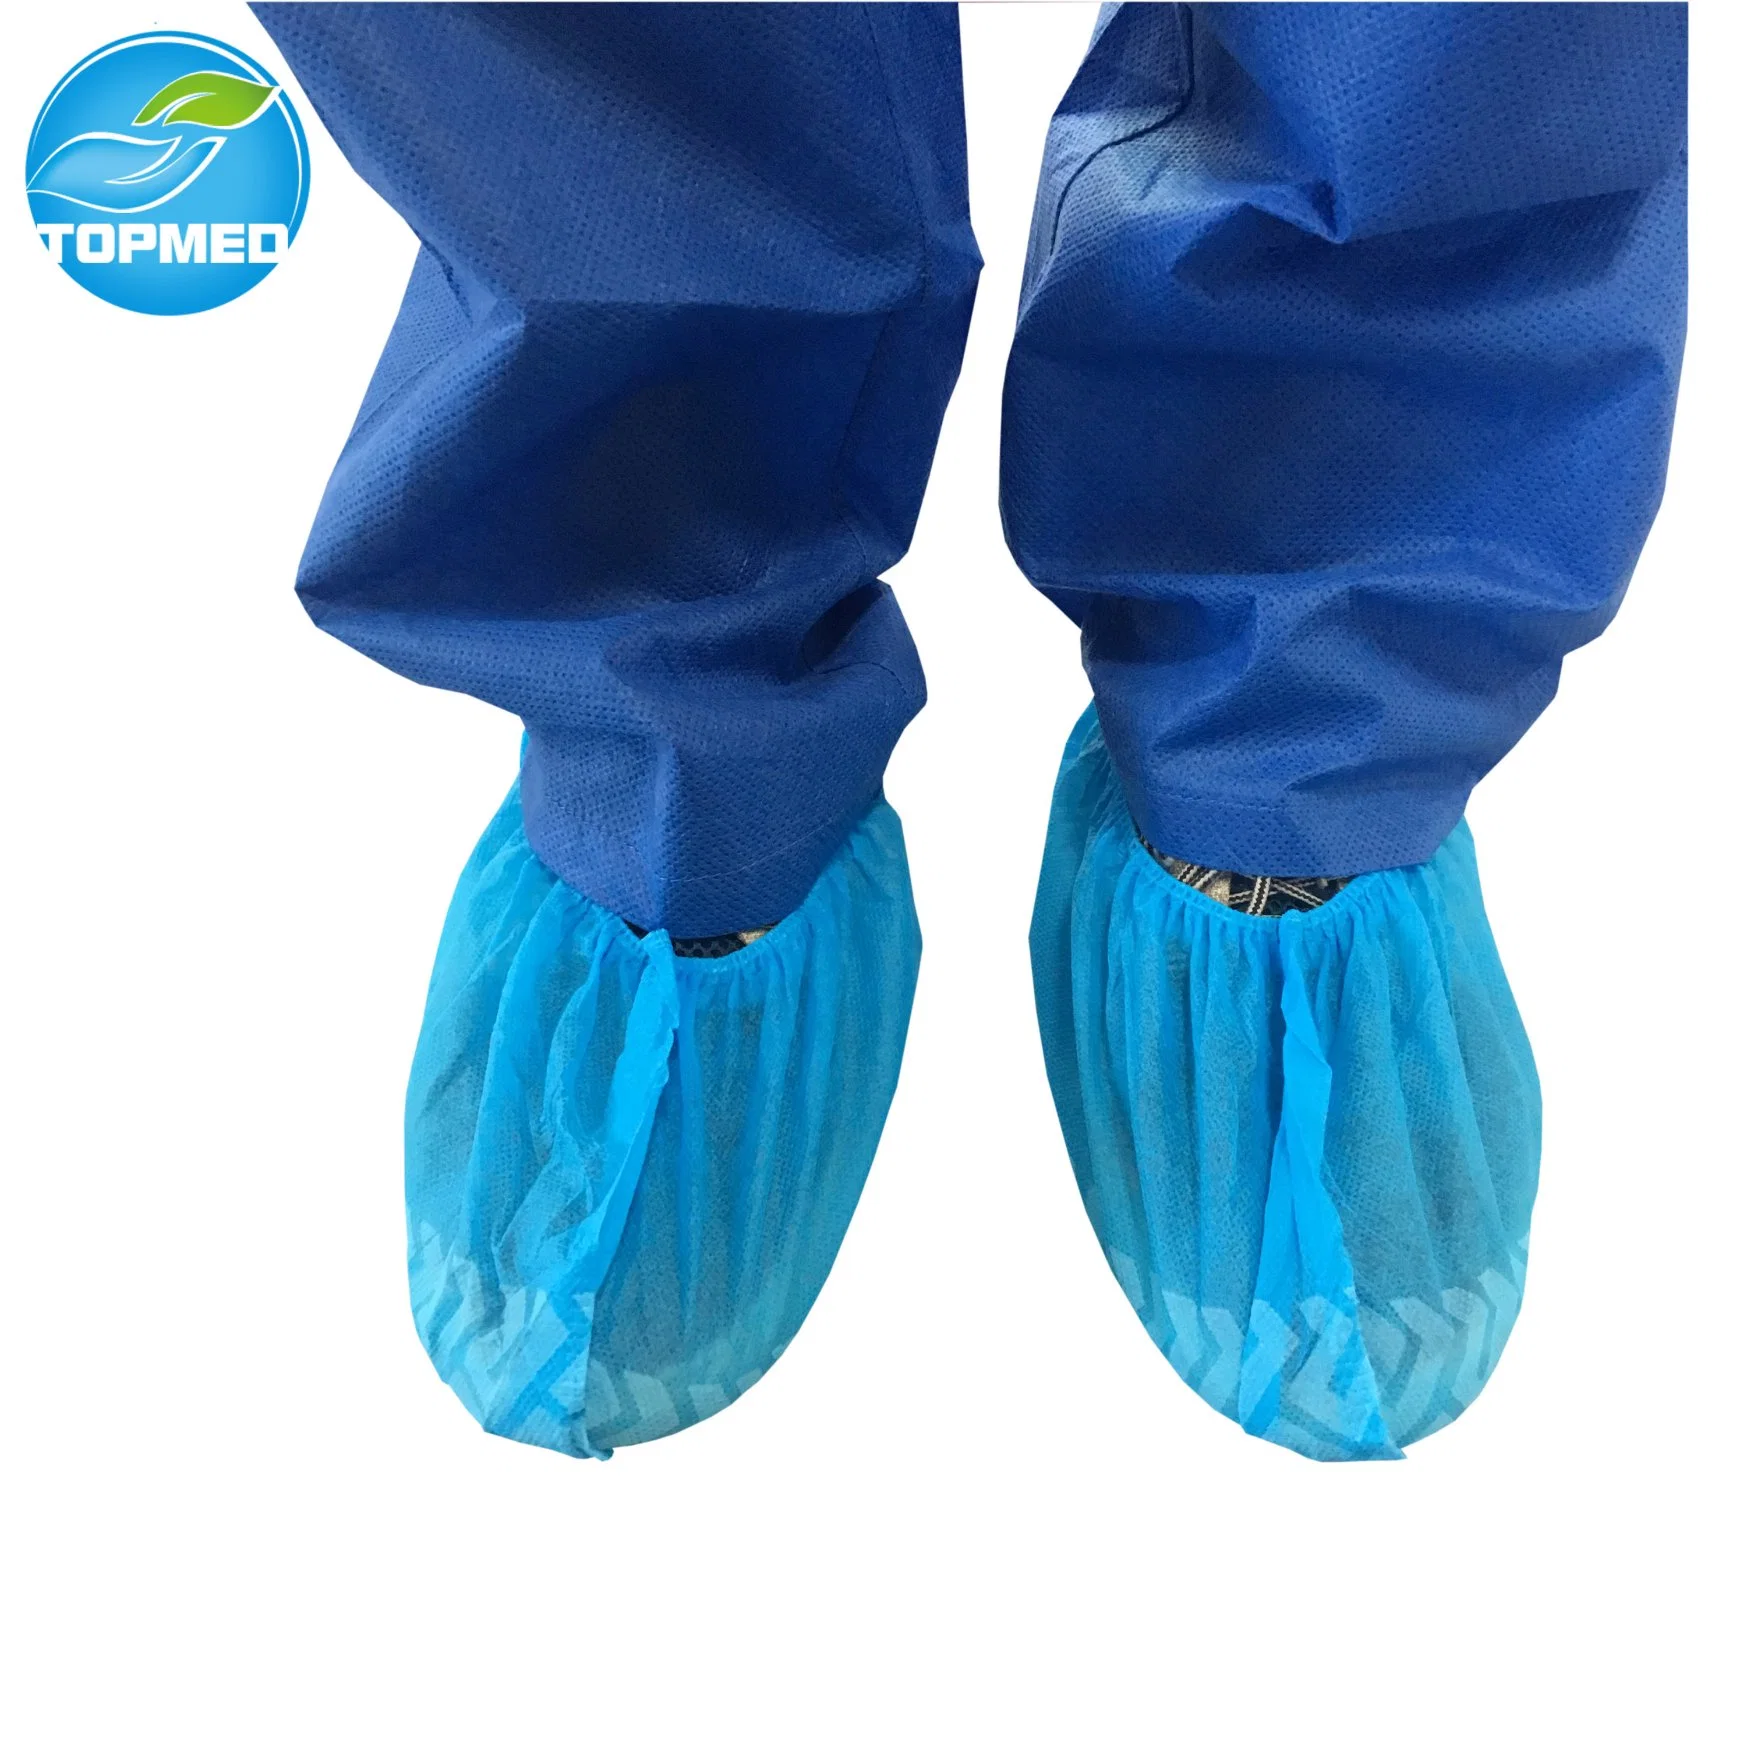 Disposable Nonwoven Shoe Cover for Medical, Daily and Surgical Use